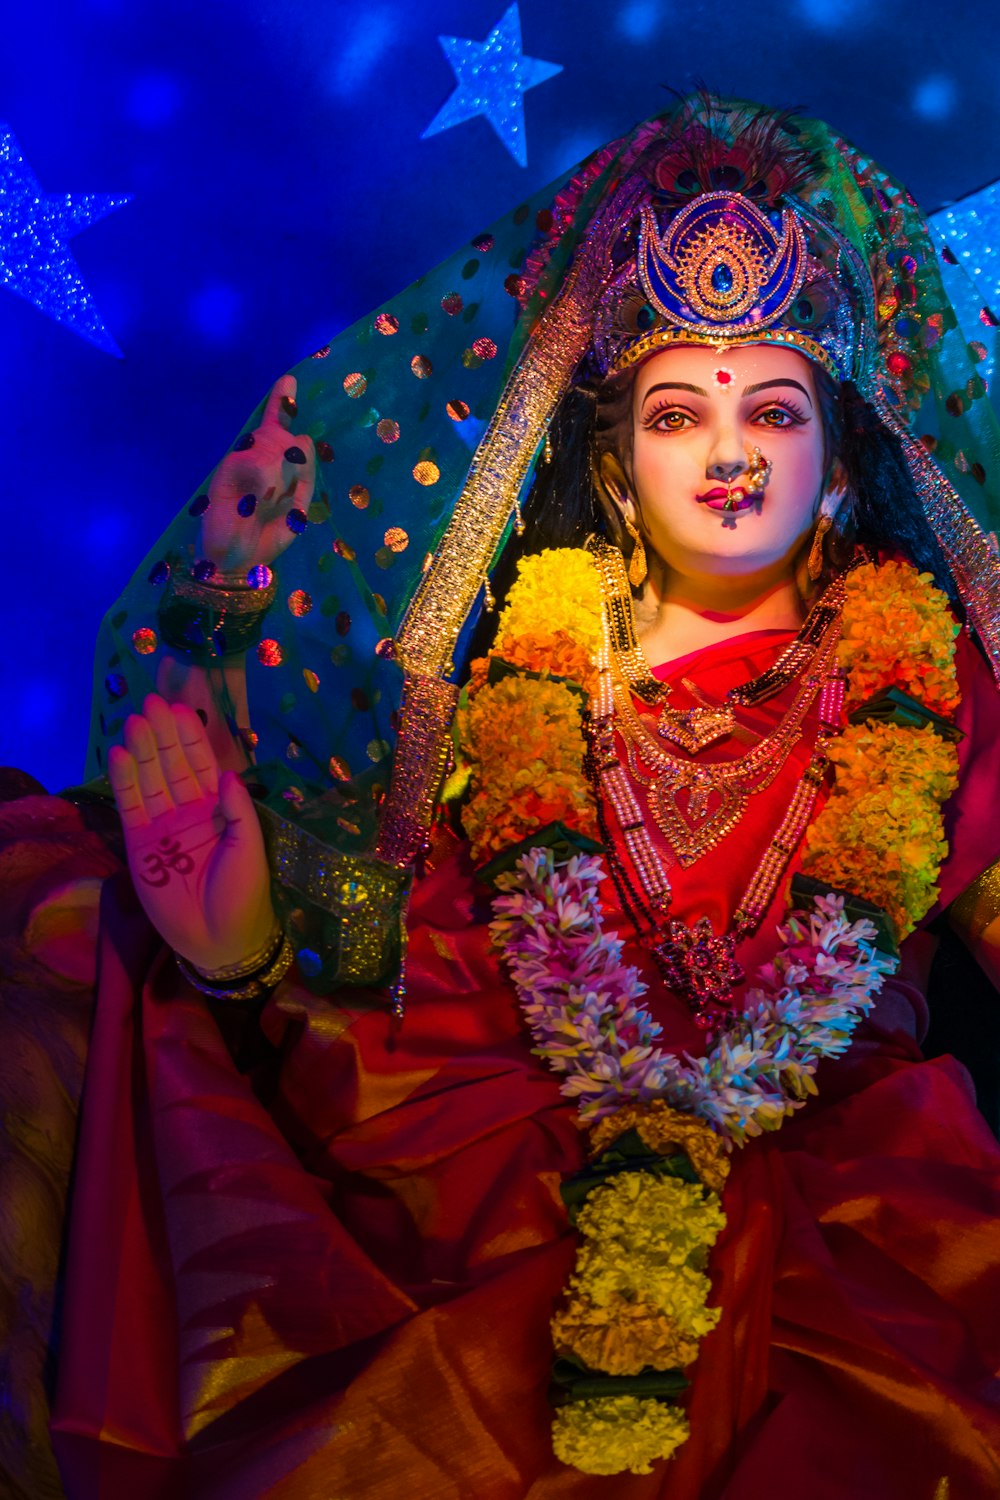 “An Incredible Compilation of Over 999 Durga Devi HD Images in Stunning Full 4K Quality”